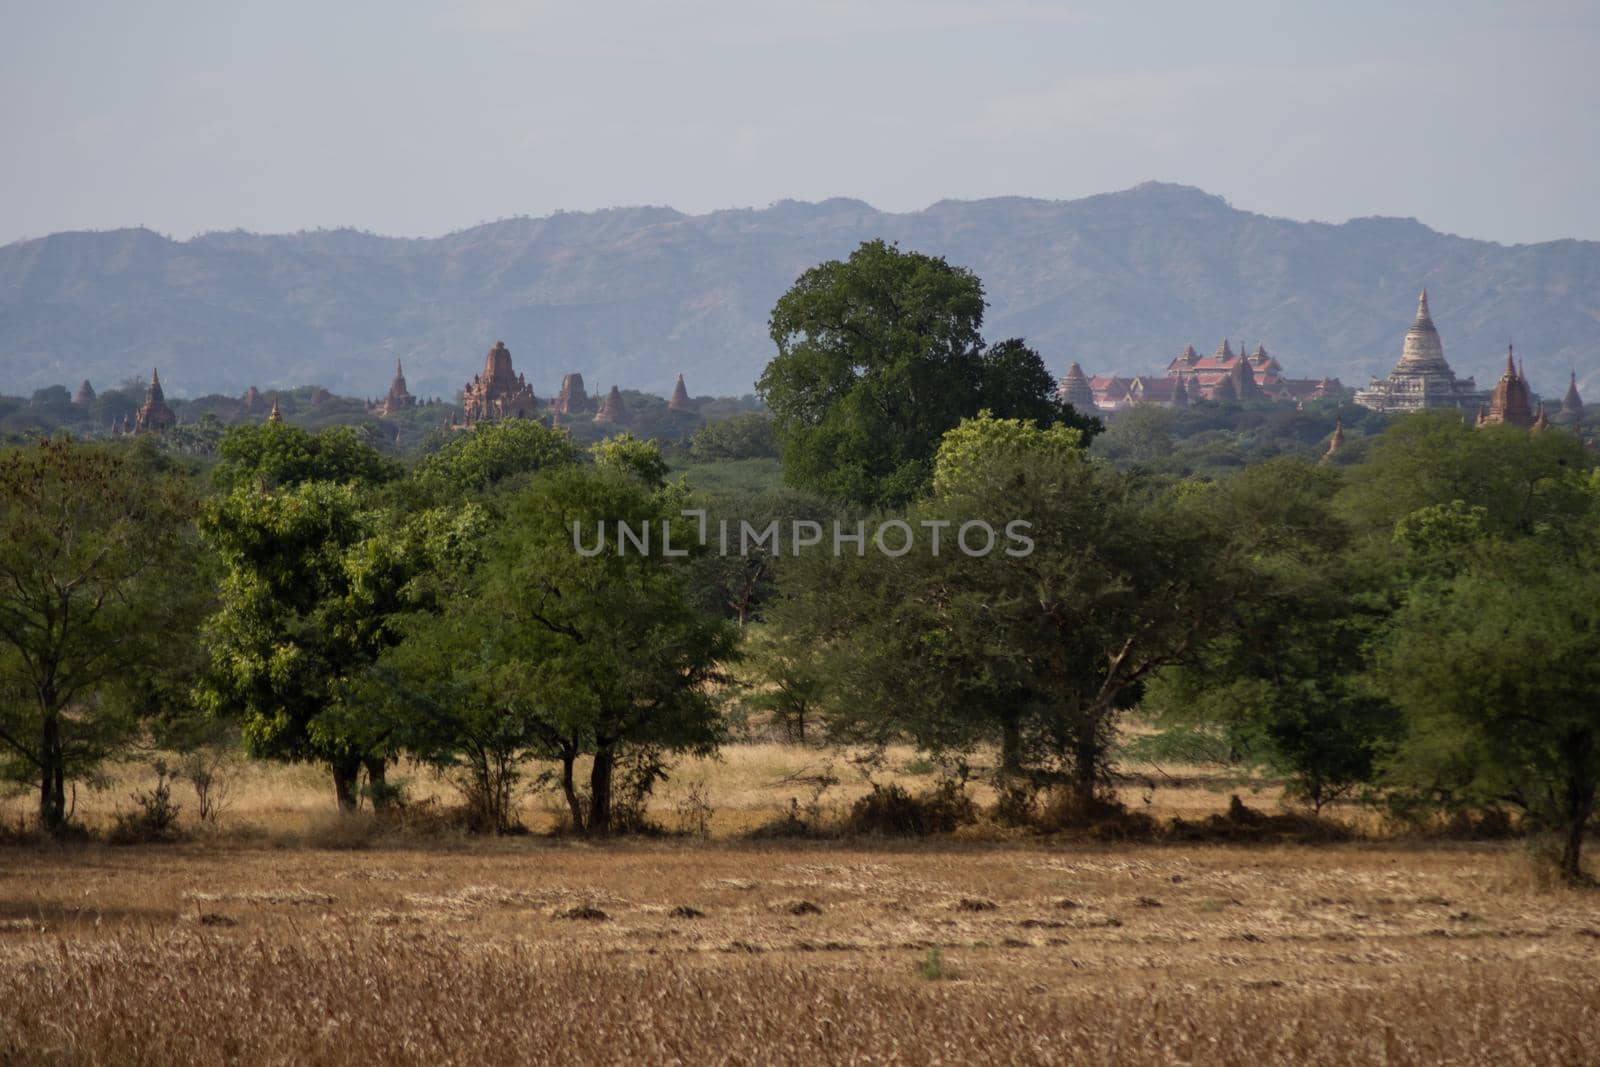 BAGAN, NYAUNG-U, MYANMAR - 3 JANUARY 2020: The top of old and historical temples peaking out above the tree vegetation in the distance from a dry grass field